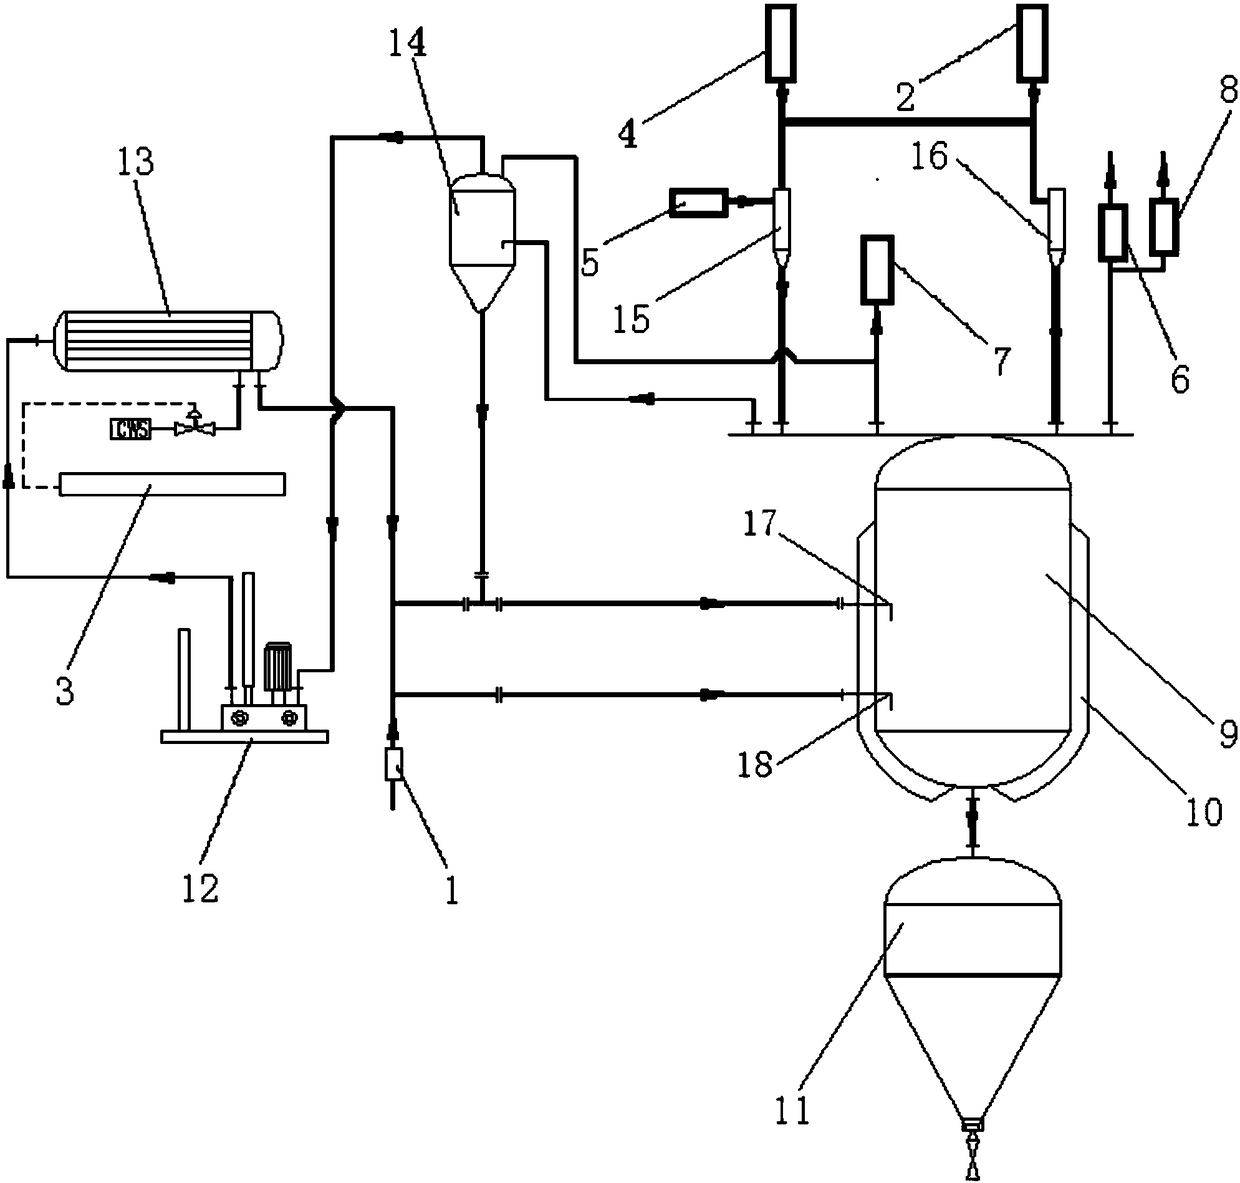 Production system and process for preparing ultra-high molecular weight polyethylene by batch method slurry process